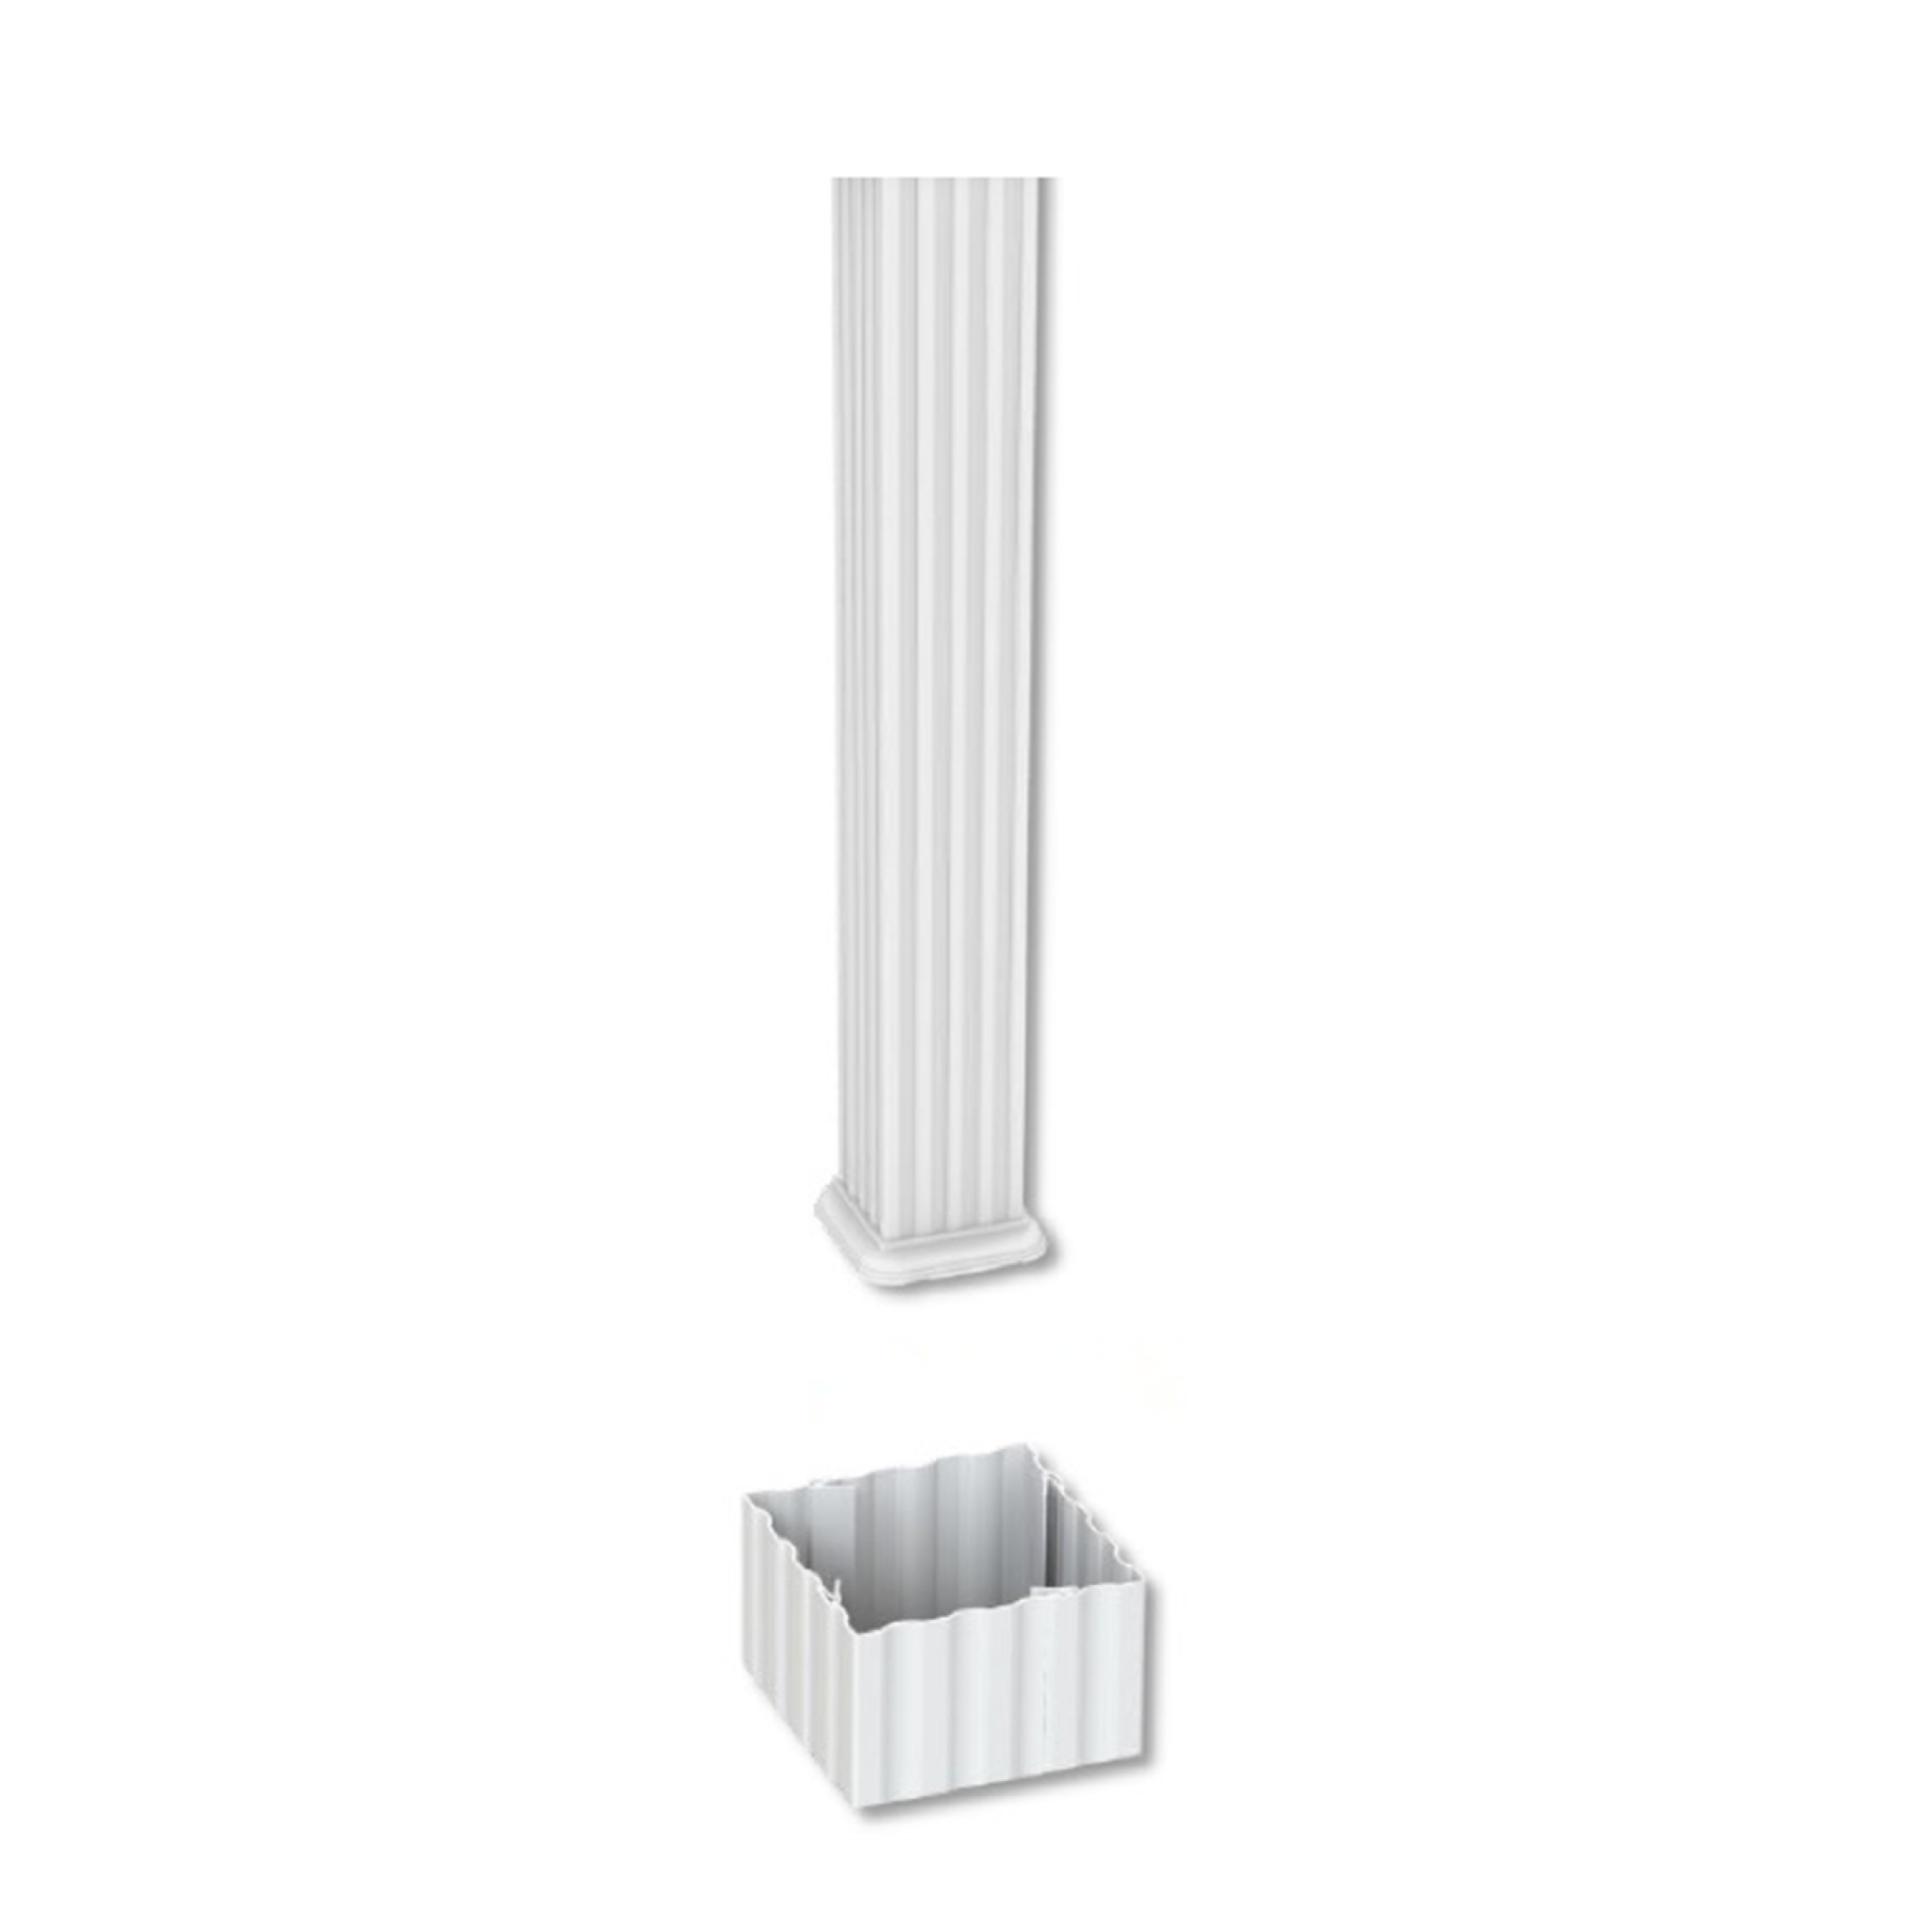 8"x8' Square Fluted Column